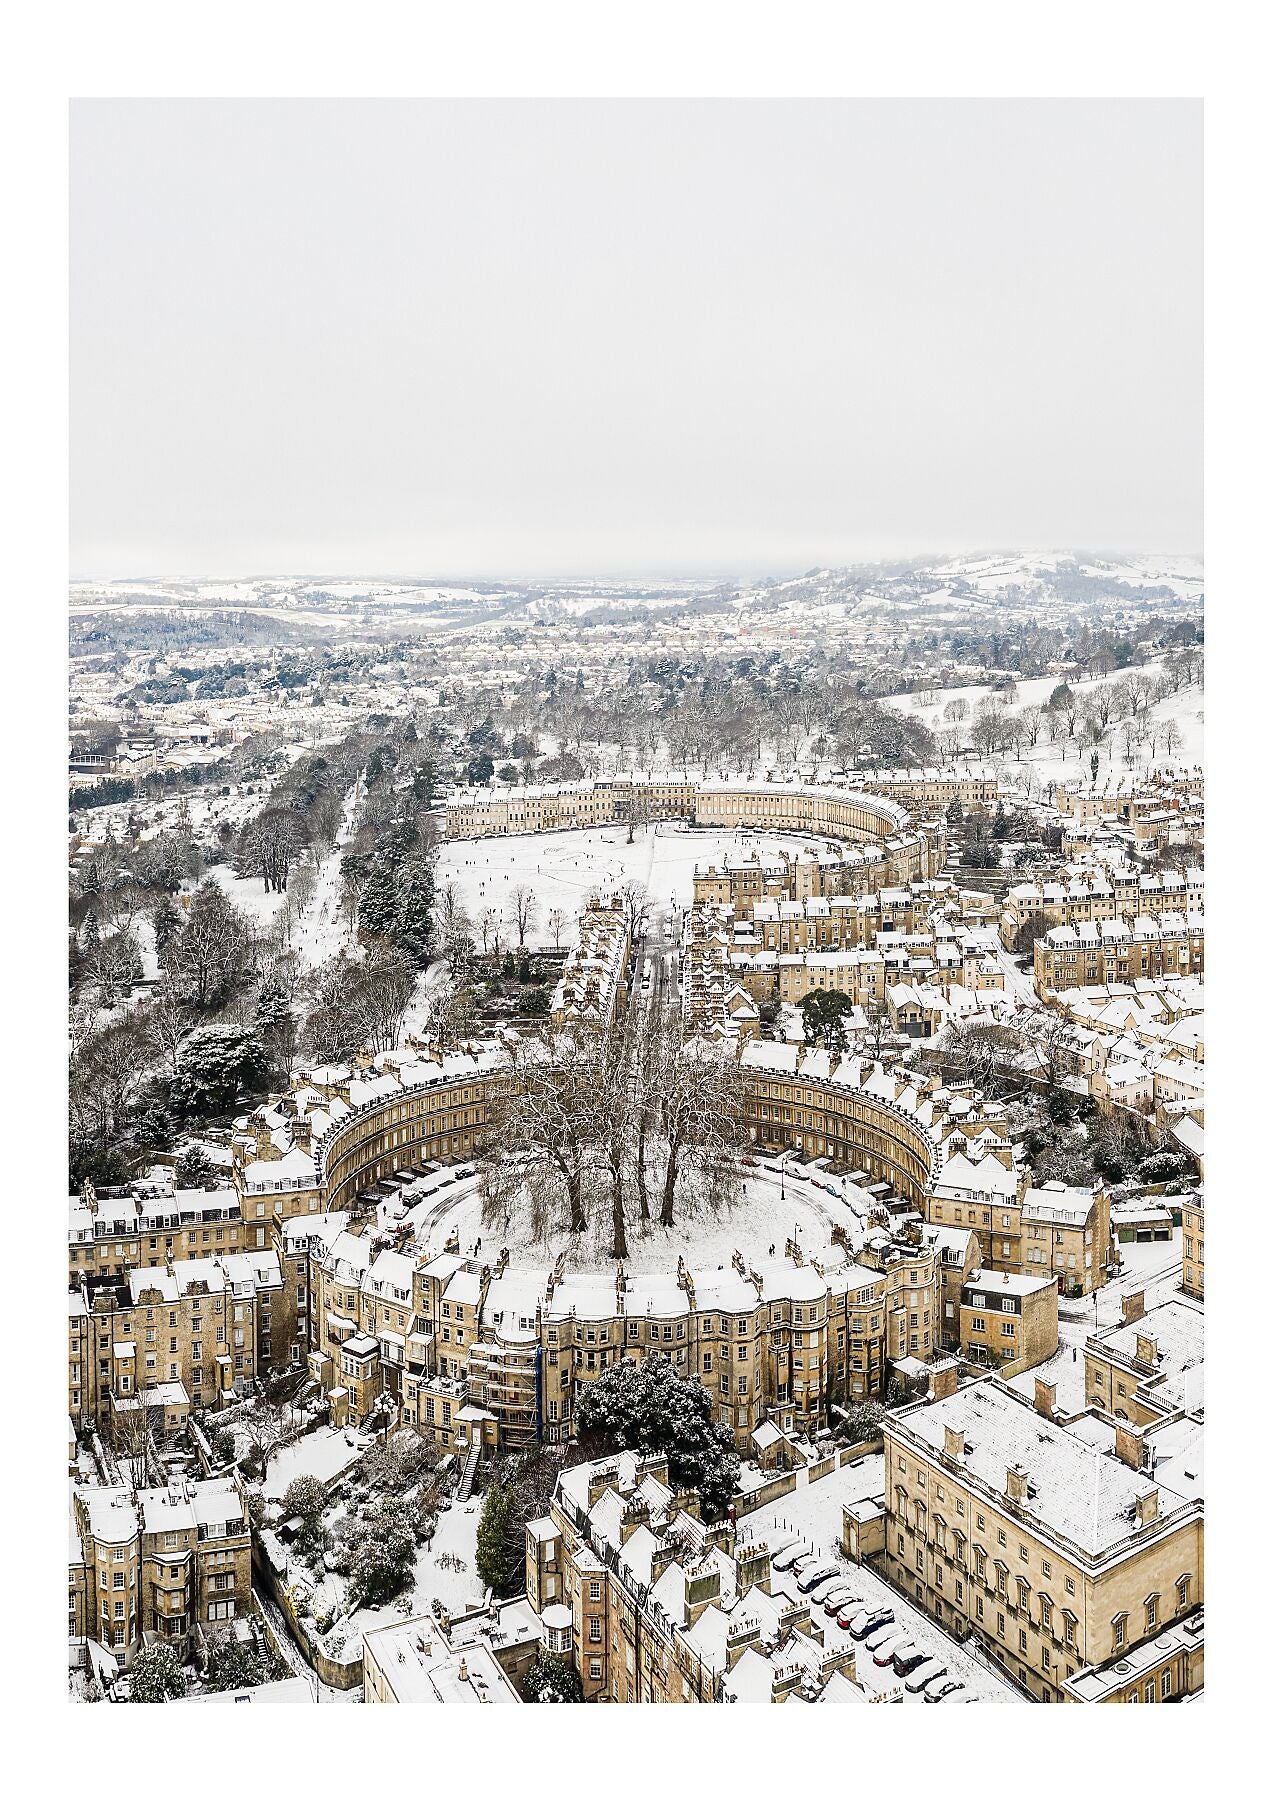 The Circus & Royal Crescent in the Snow (Portrait)